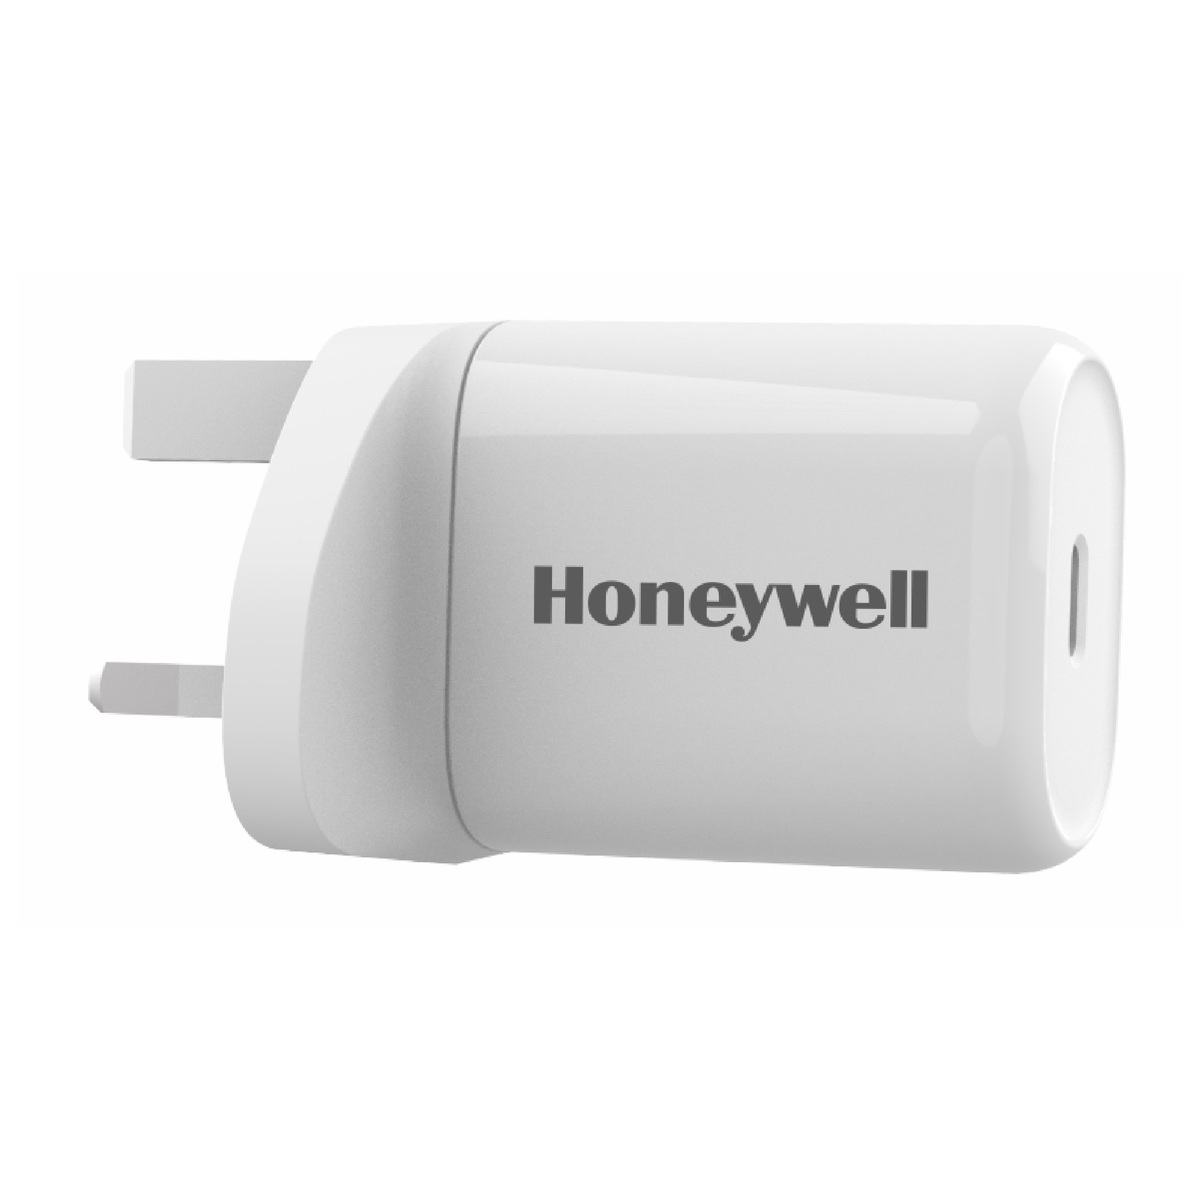 Honeywell ZEST Type C Wall Charger, 20 W, White, HC000025